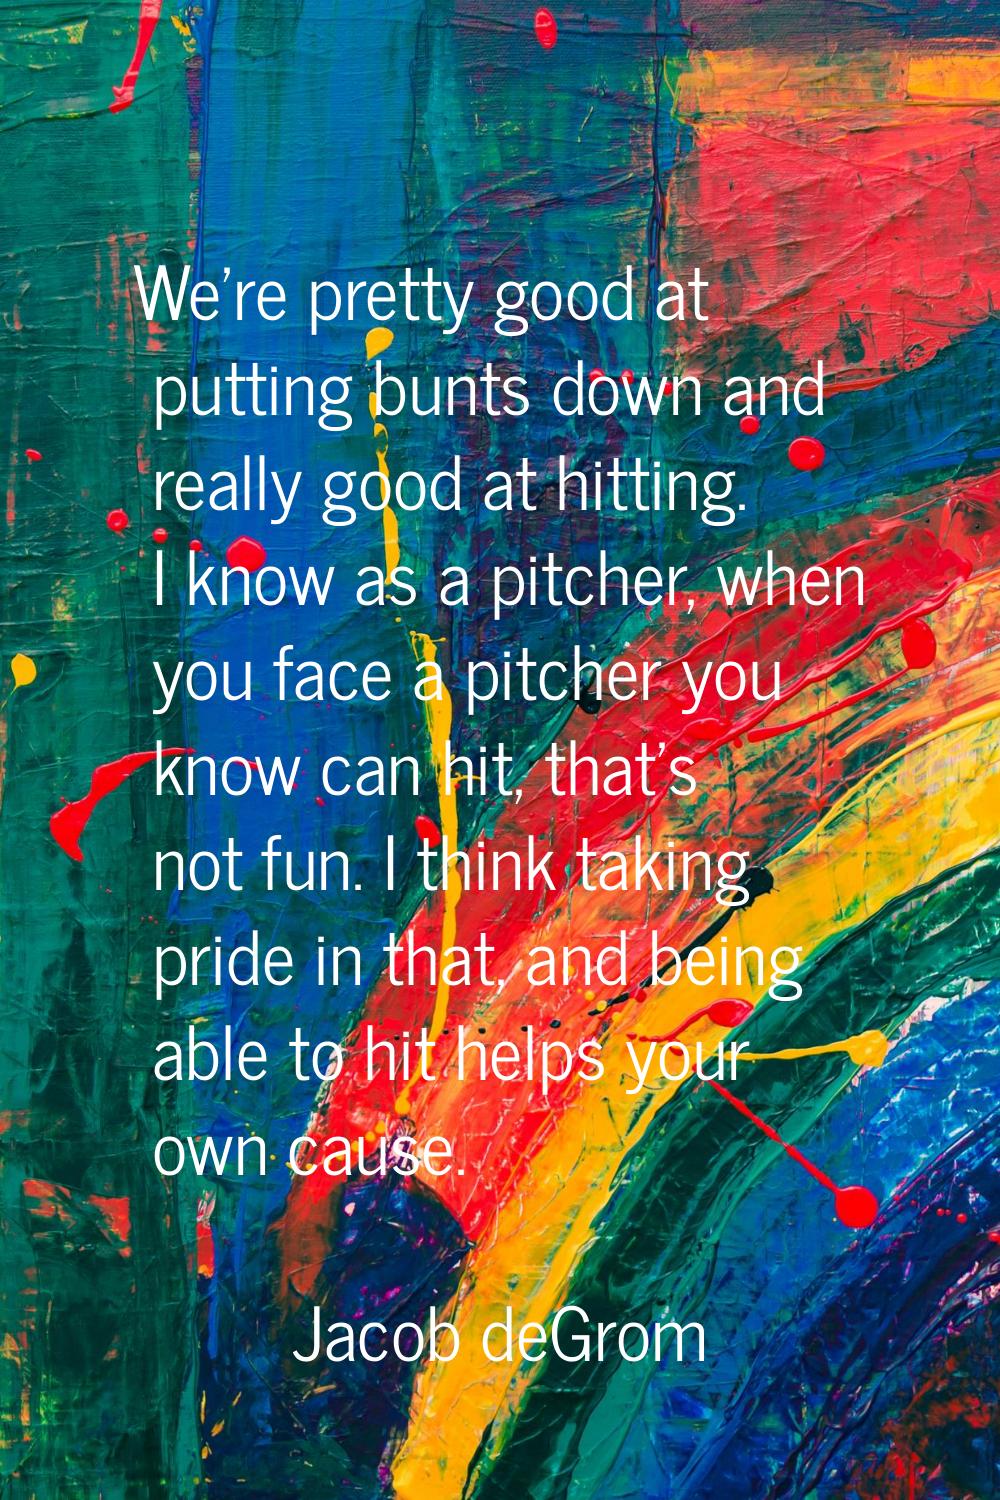 We're pretty good at putting bunts down and really good at hitting. I know as a pitcher, when you f